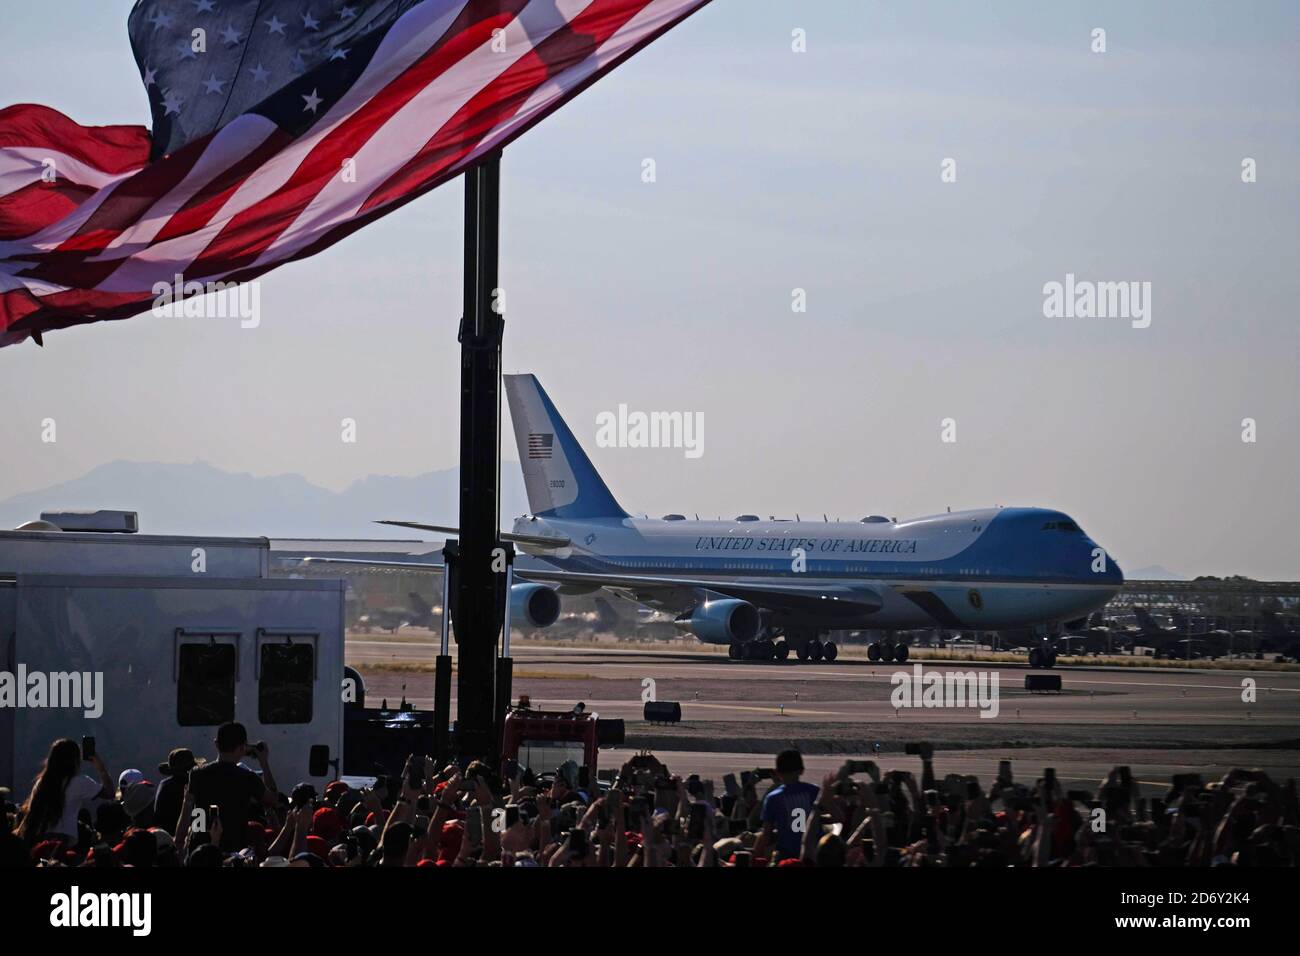 Tucson, Arizona, USA. 19th Oct, 2020. President Donald Trump holds campaign rally at the Tucson airport two weeks before the 2020 election. Air Force One landing. Credit: Christopher Brown/ZUMA Wire/Alamy Live News Stock Photo